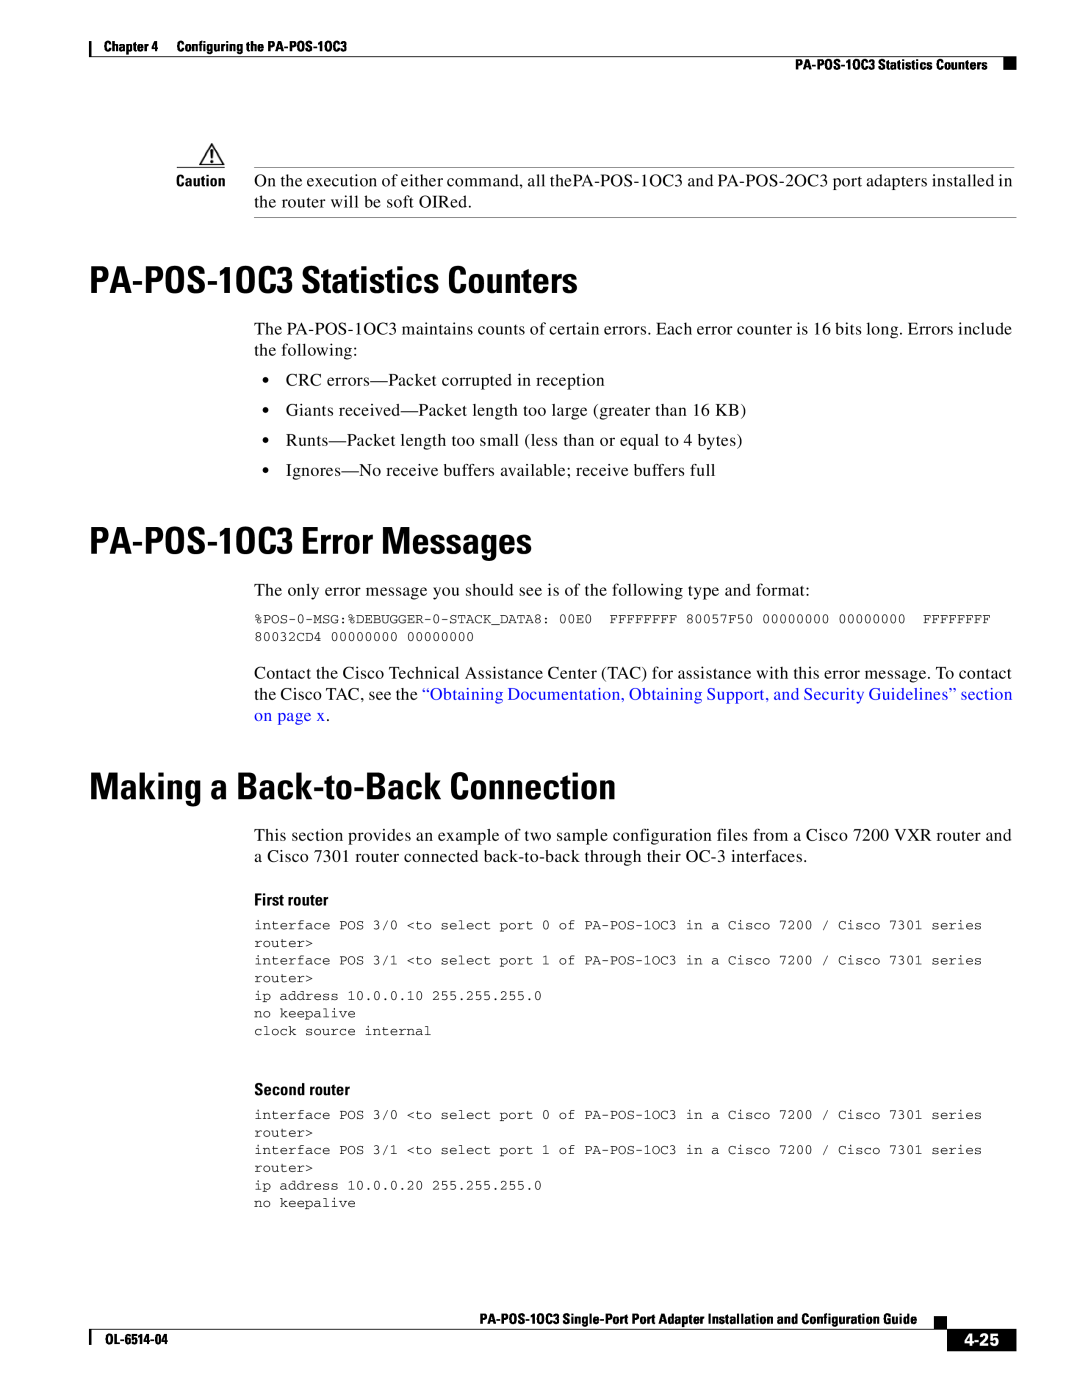 Cisco Systems manual PA-POS-1OC3 Statistics Counters, PA-POS-1OC3 Error Messages, Making a Back-to-Back Connection, 4-25 